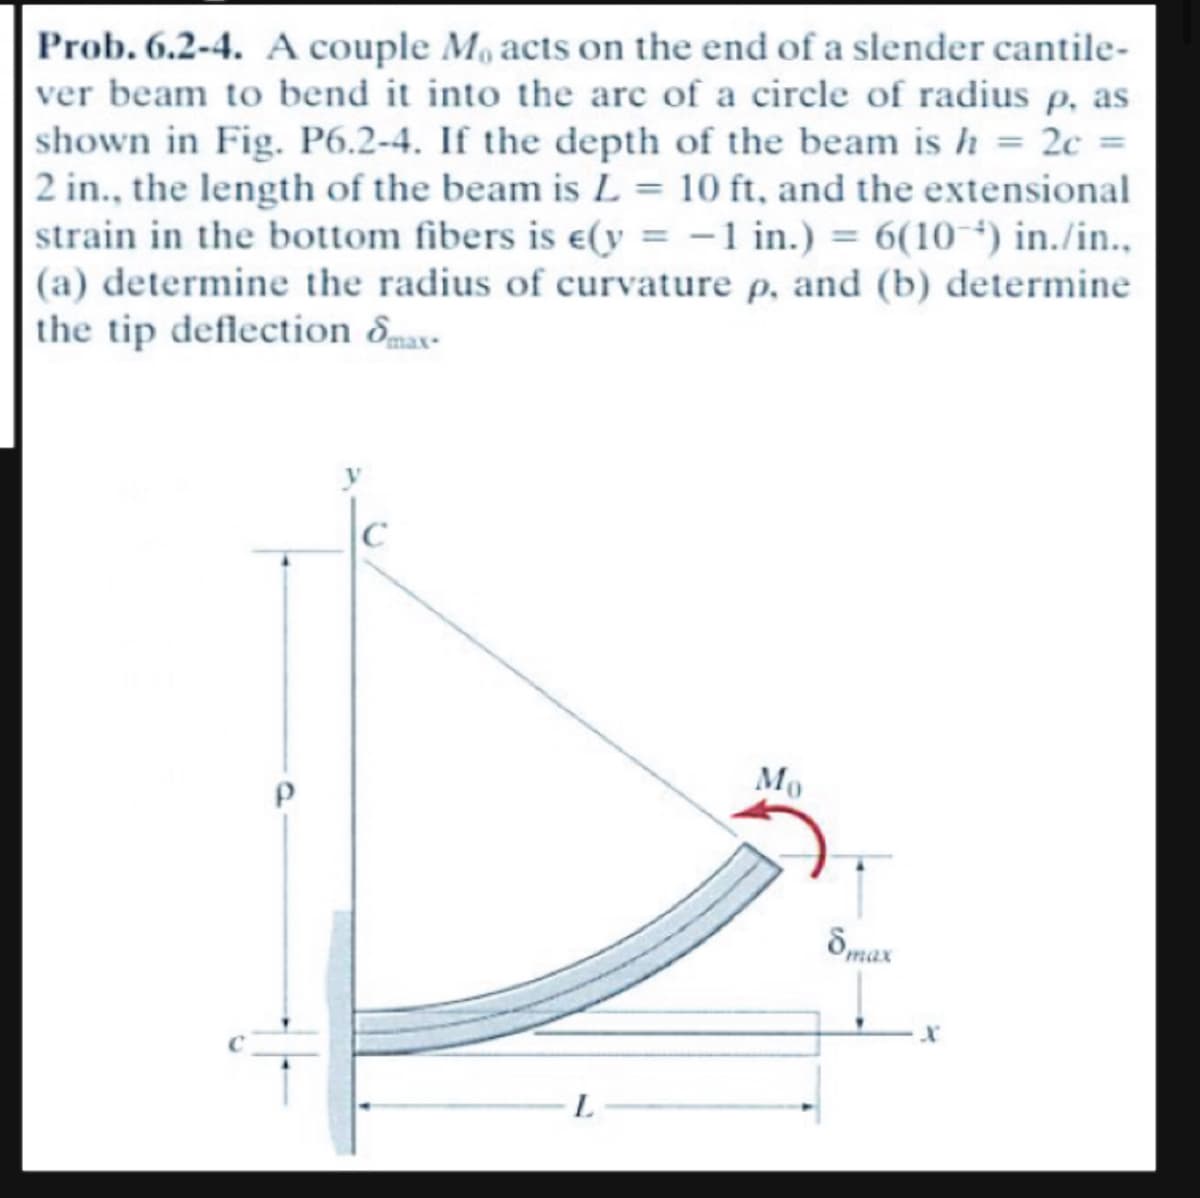 Prob. 6.2-4. A couple Mo acts on the end of a slender cantile-
ver beam to bend it into the arc of a circle of radius p. as
shown in Fig. P6.2-4. If the depth of the beam is h = 2c =
2 in., the length of the beam is L= 10 ft, and the extensional
strain in the bottom fibers is e(y = -1 in.) = 6(10-¹) in./in..
(a) determine the radius of curvature p, and (b) determine
the tip deflection max-
↓
L
Mo
8max